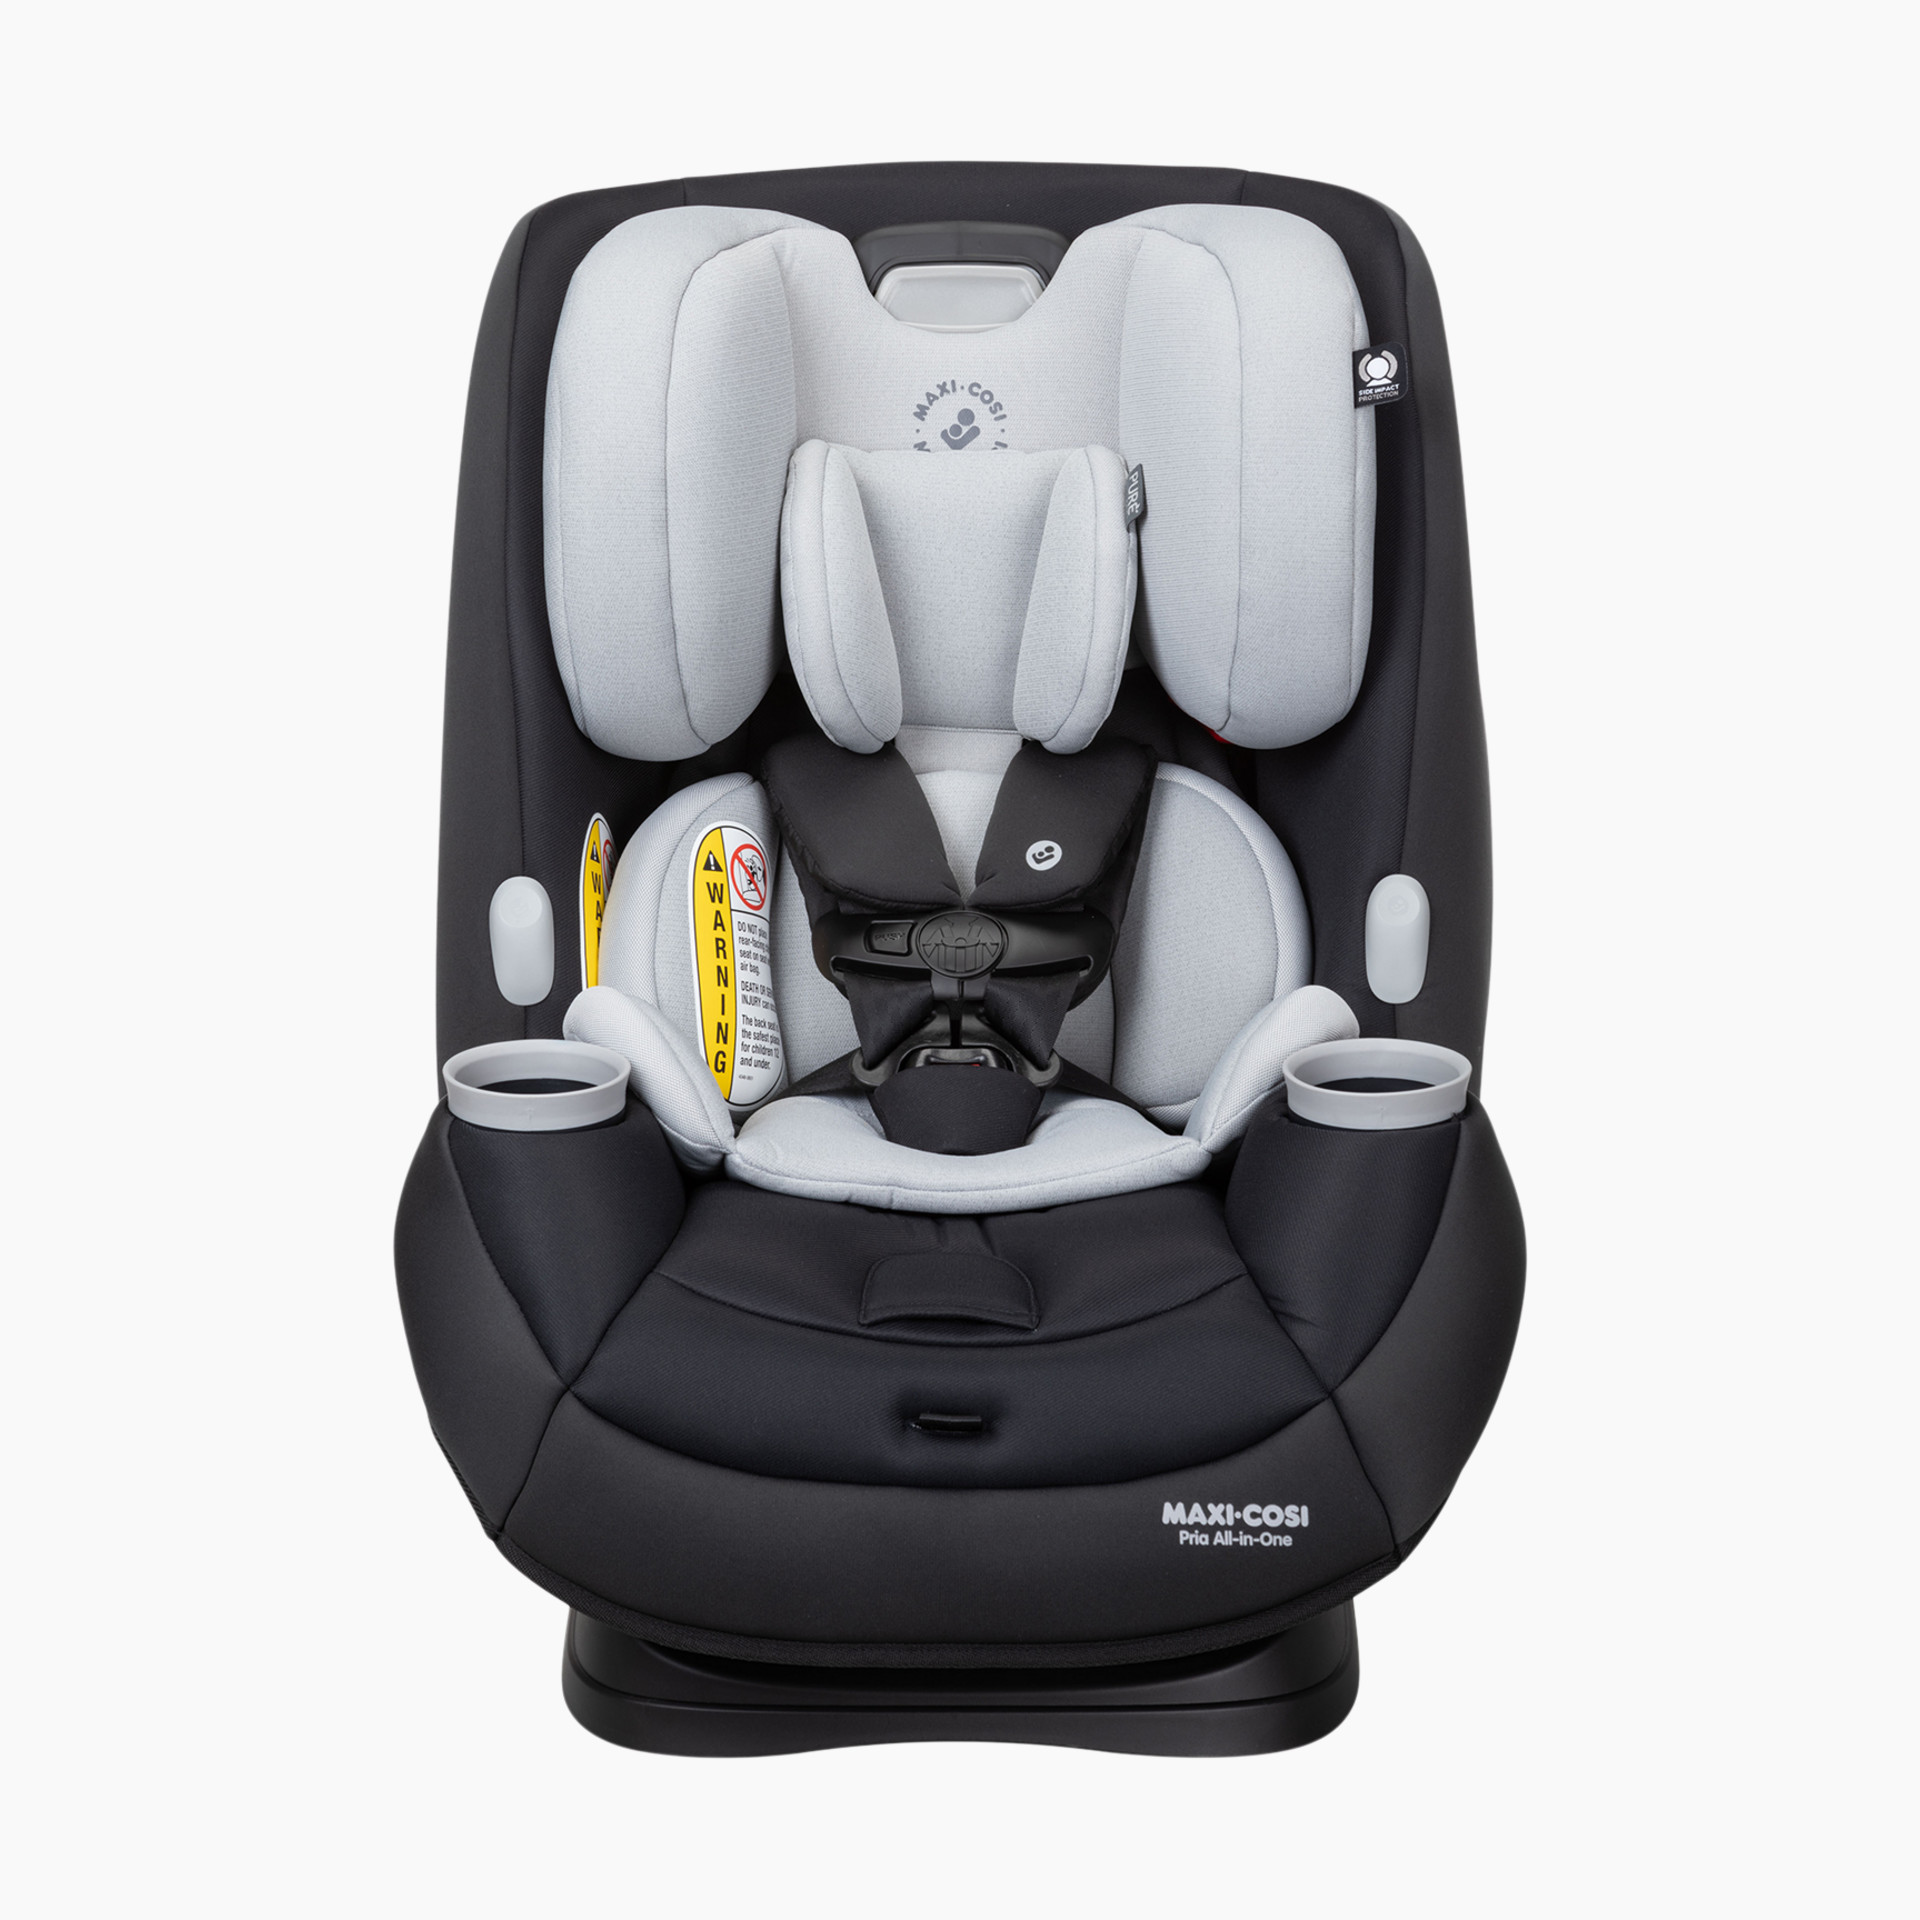 fout Junior item Maxi-Cosi Pria All-in-One Convertible Car Seat | Babylist Store